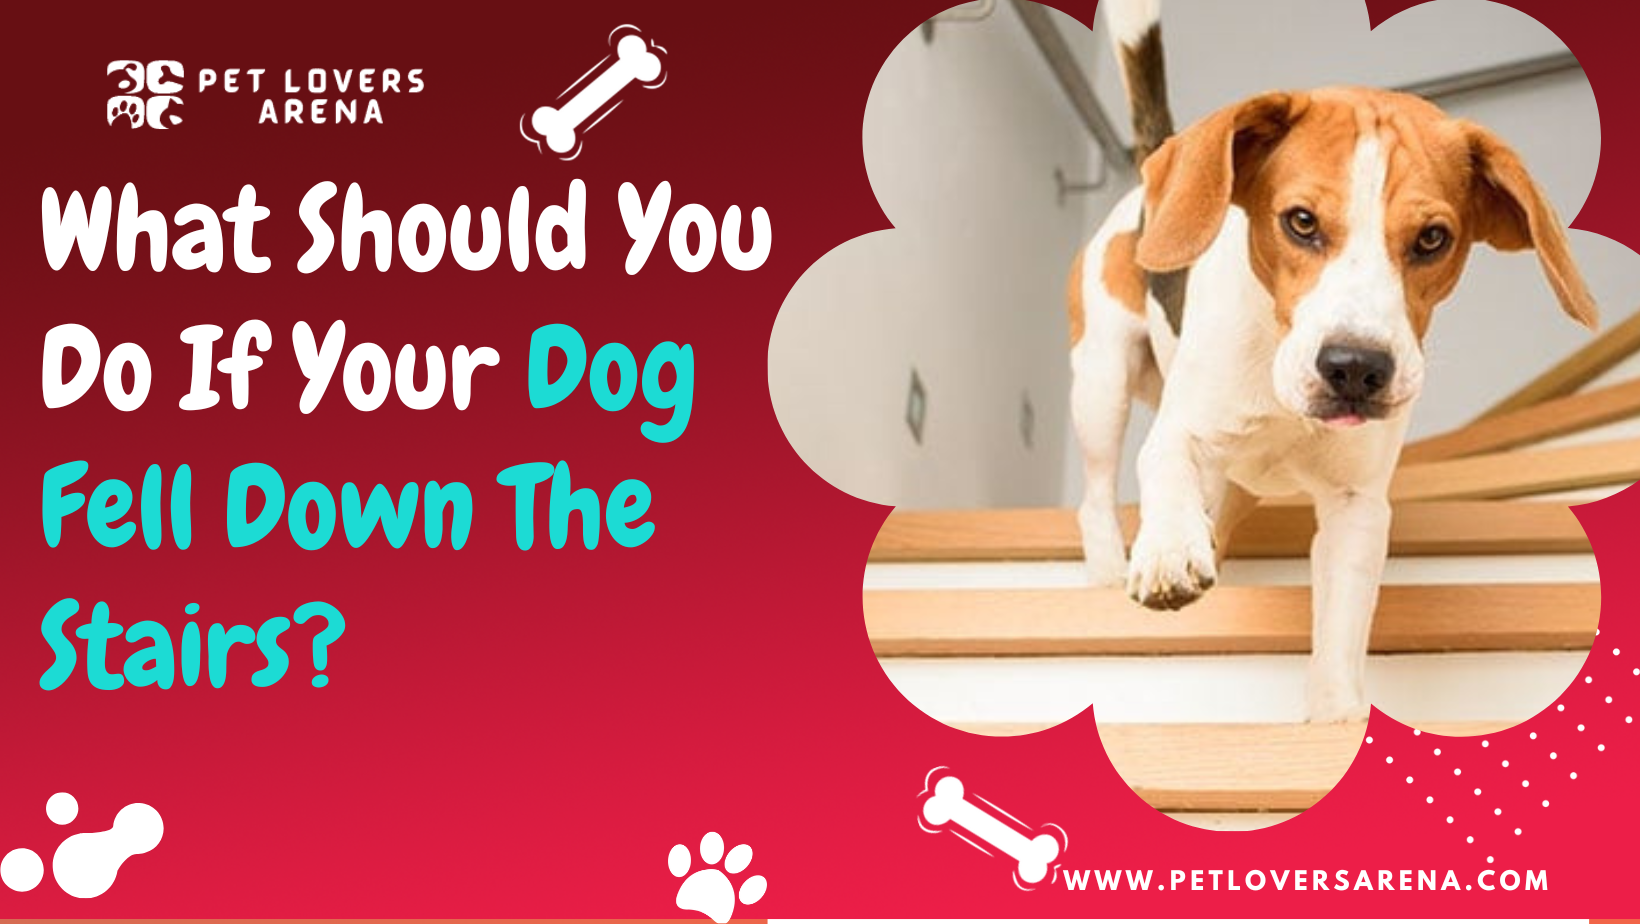 What Should You Do If Your Dog Fell Down The Stairs?